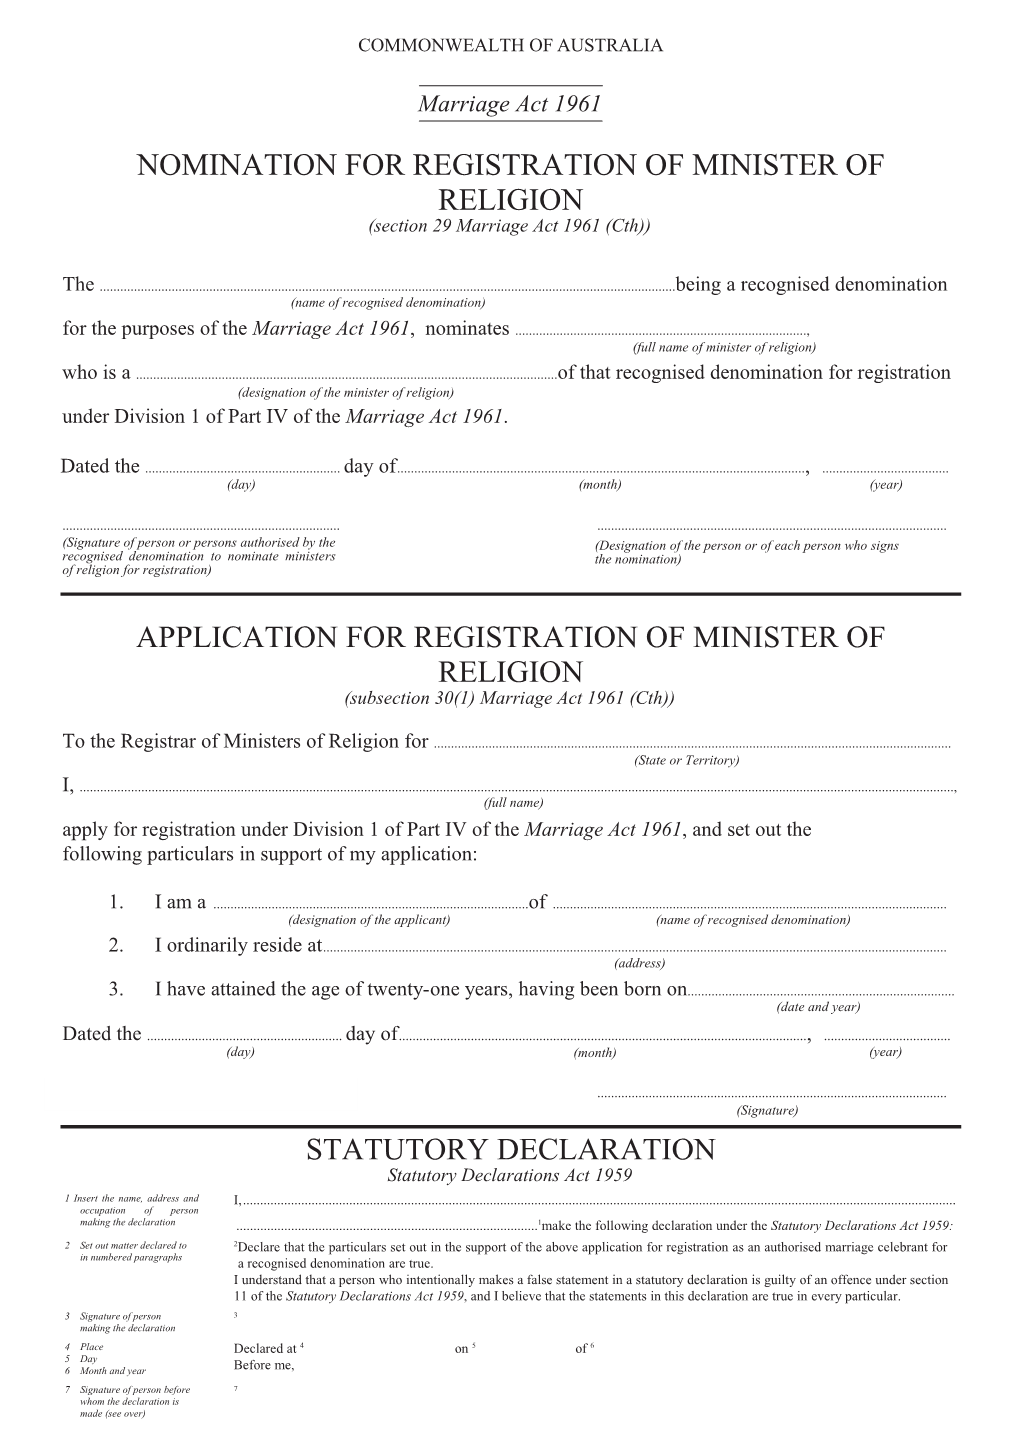 Nomination and Application for Registration of Minister of Religion